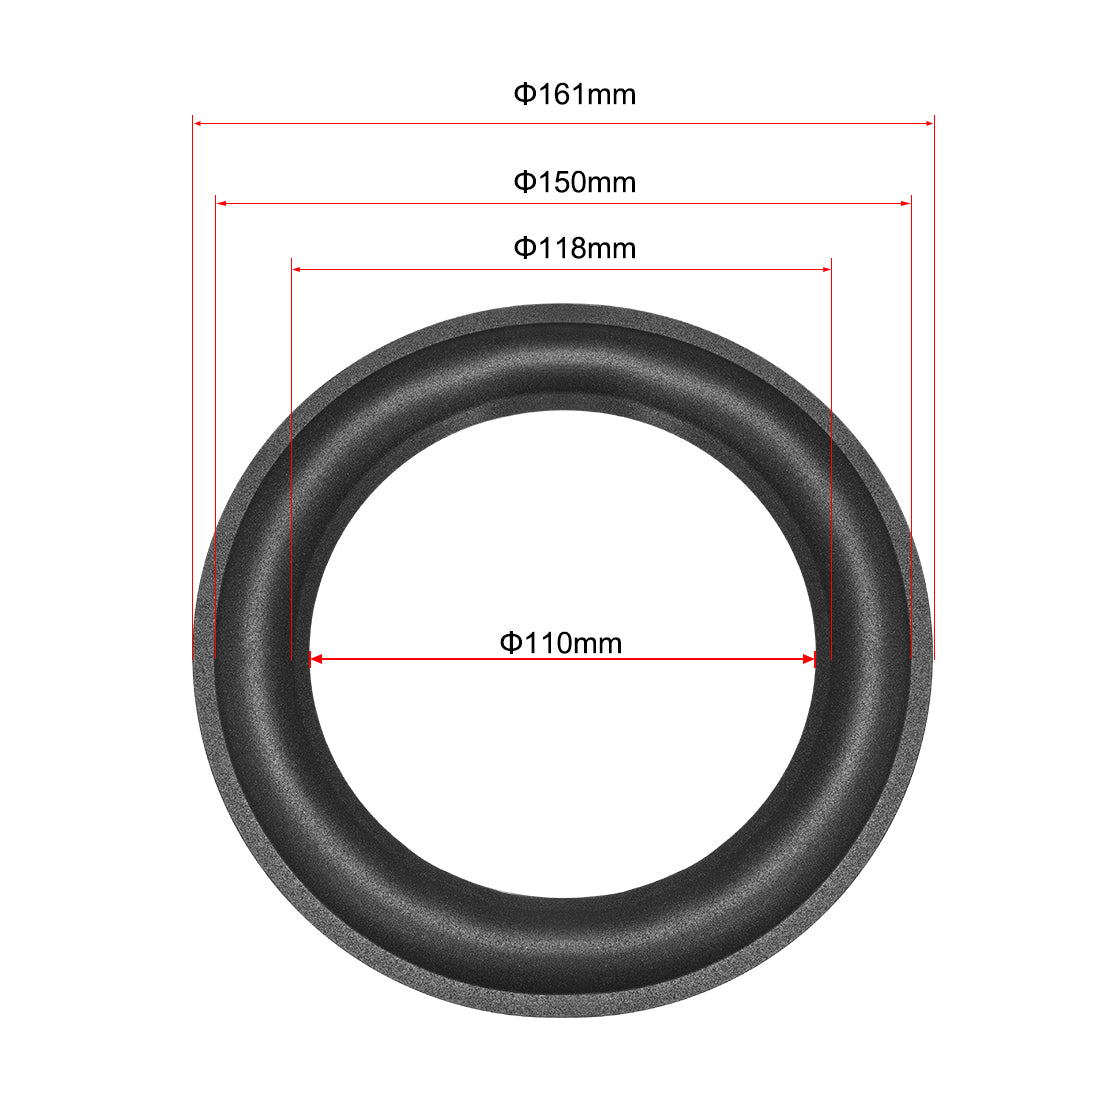 uxcell Uxcell 161mm( 6.34 Inches) Speaker Foam Edge Surround Rings Replacement Parts for Speaker Repair or DIY 2pcs